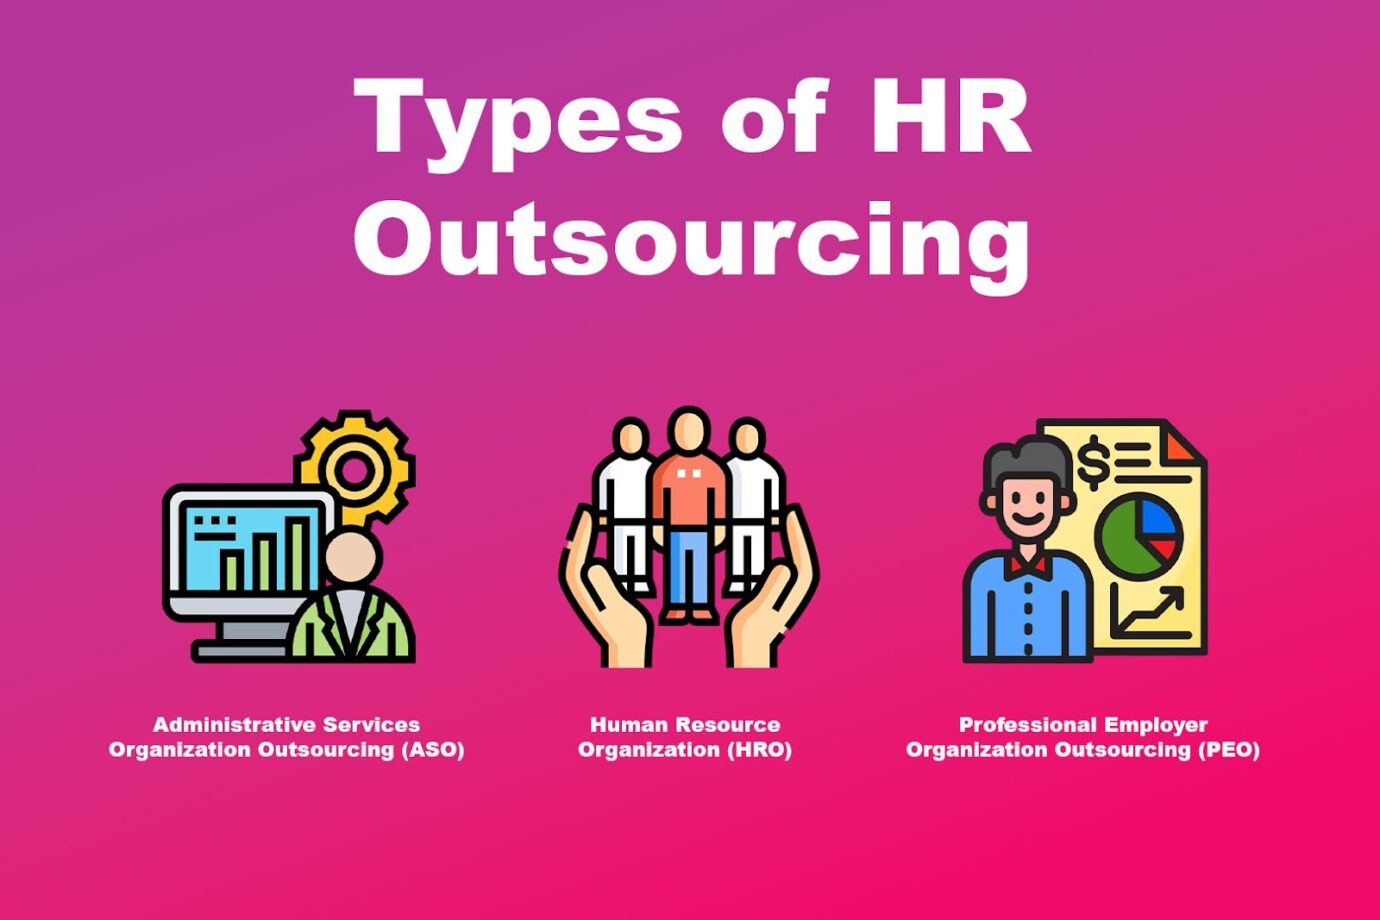 The Types of HR Outsourcing